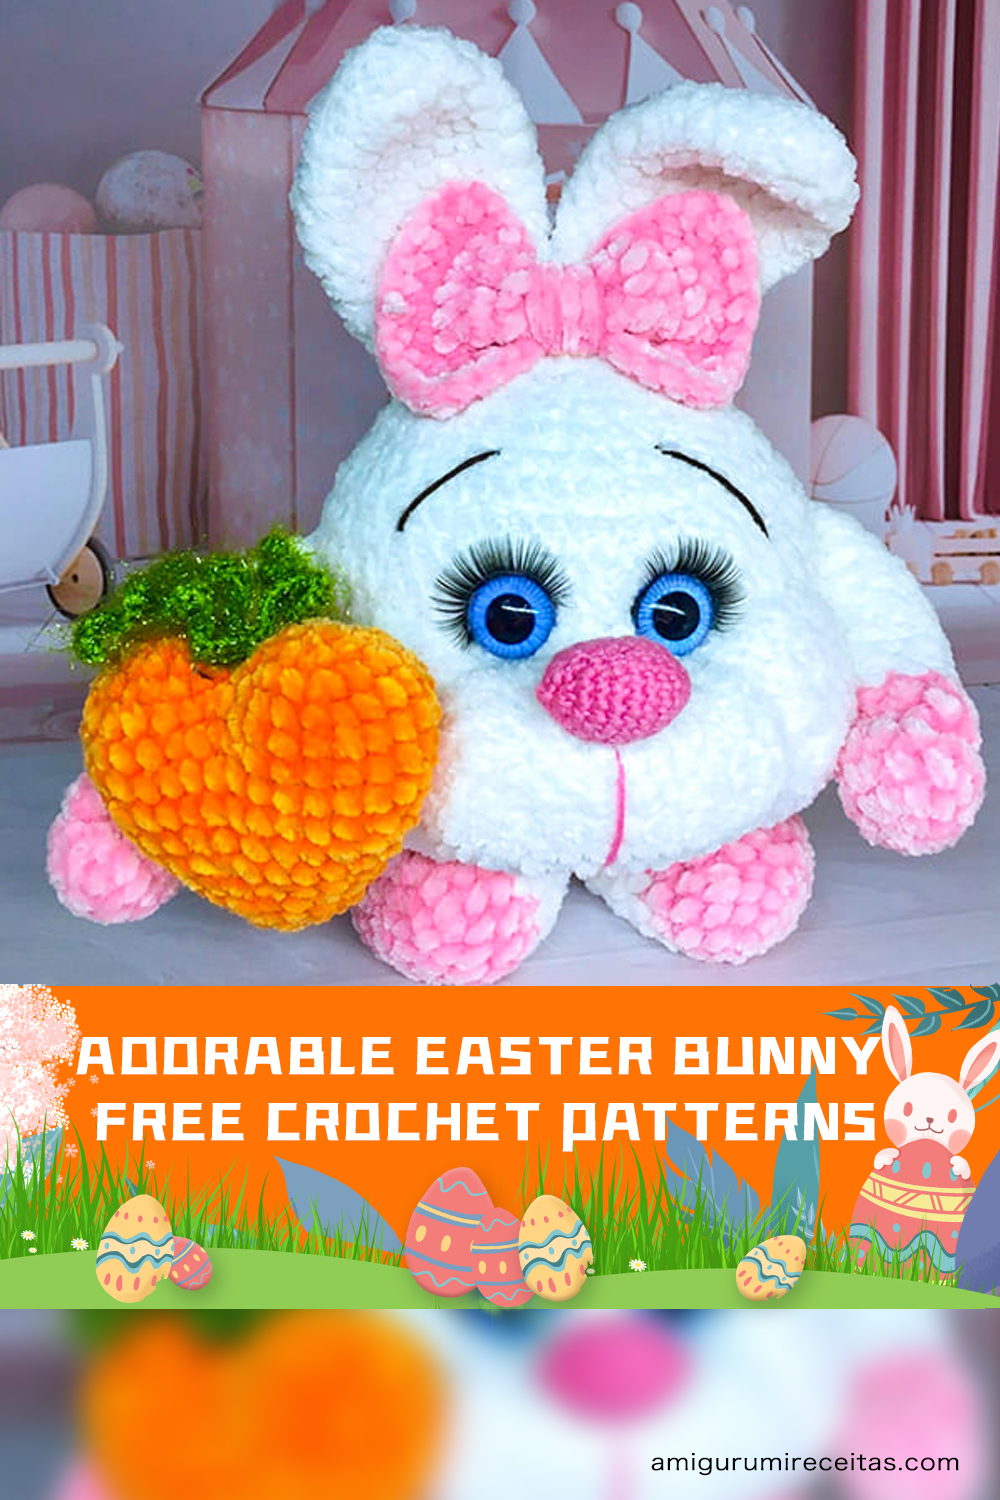 FREE Crochet Easter Bunny Patterns